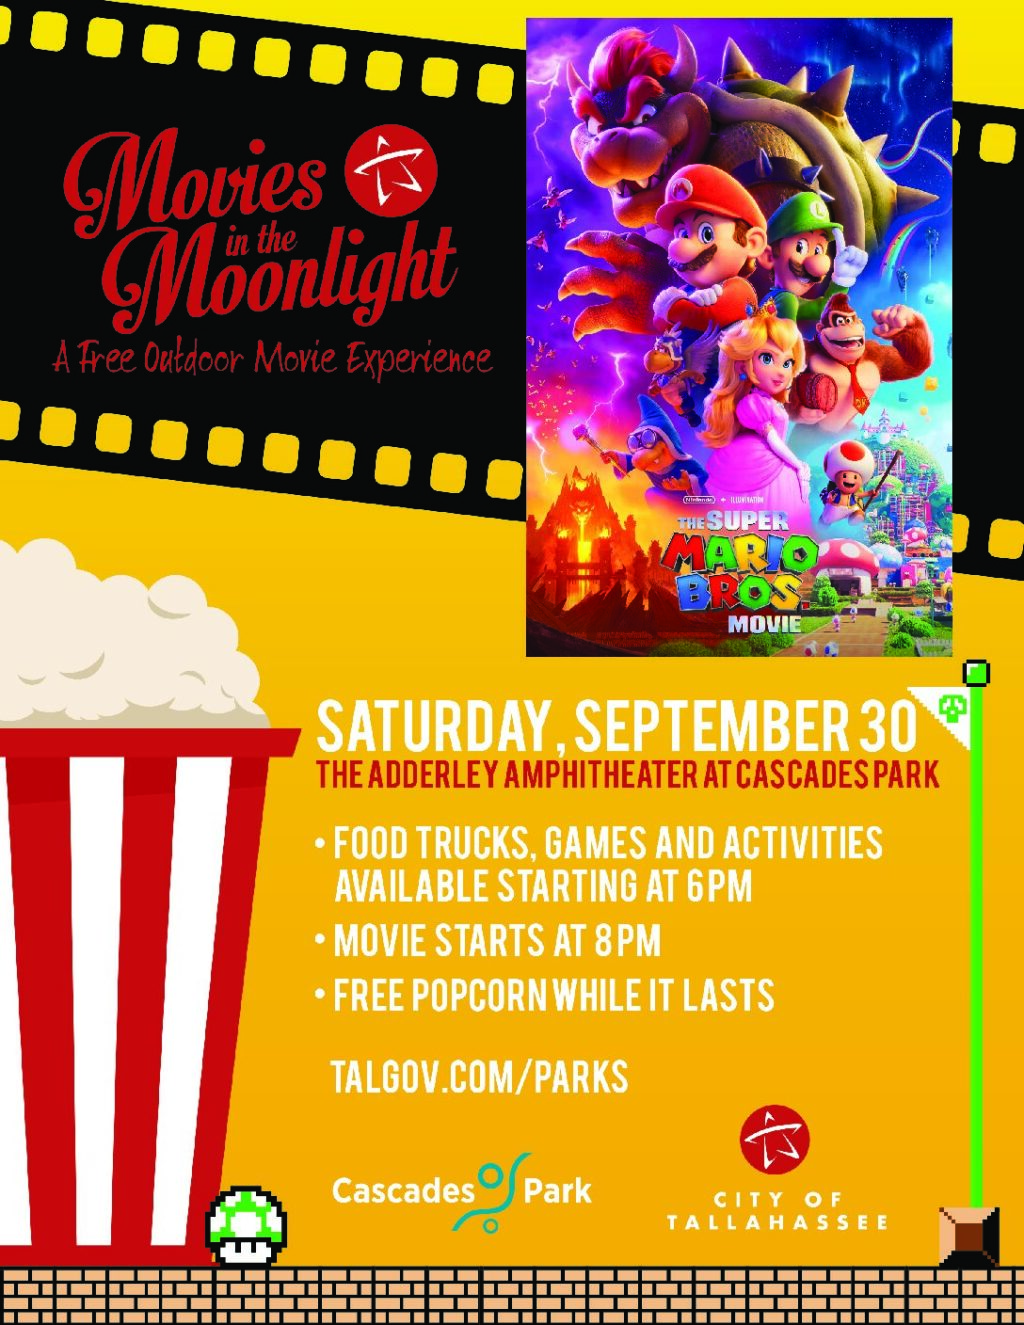 Movies In The Moonlight at Cascades Park